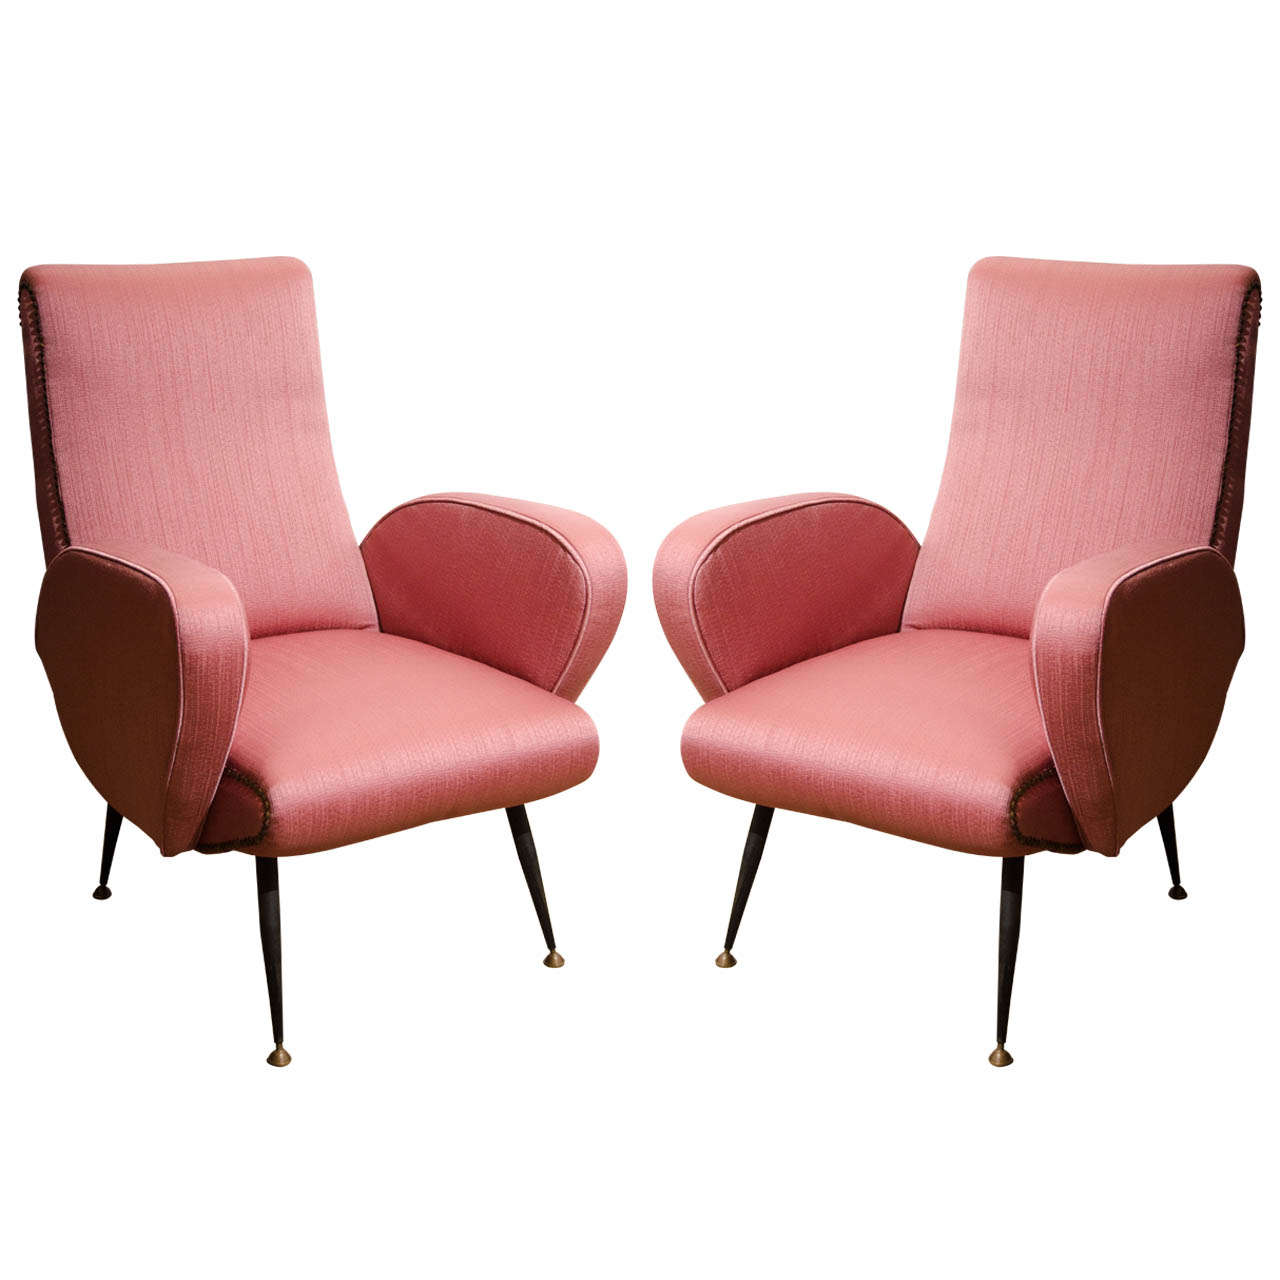 Pair of 1950s Italian Armchairs in the Style of Gianfranco Frattini